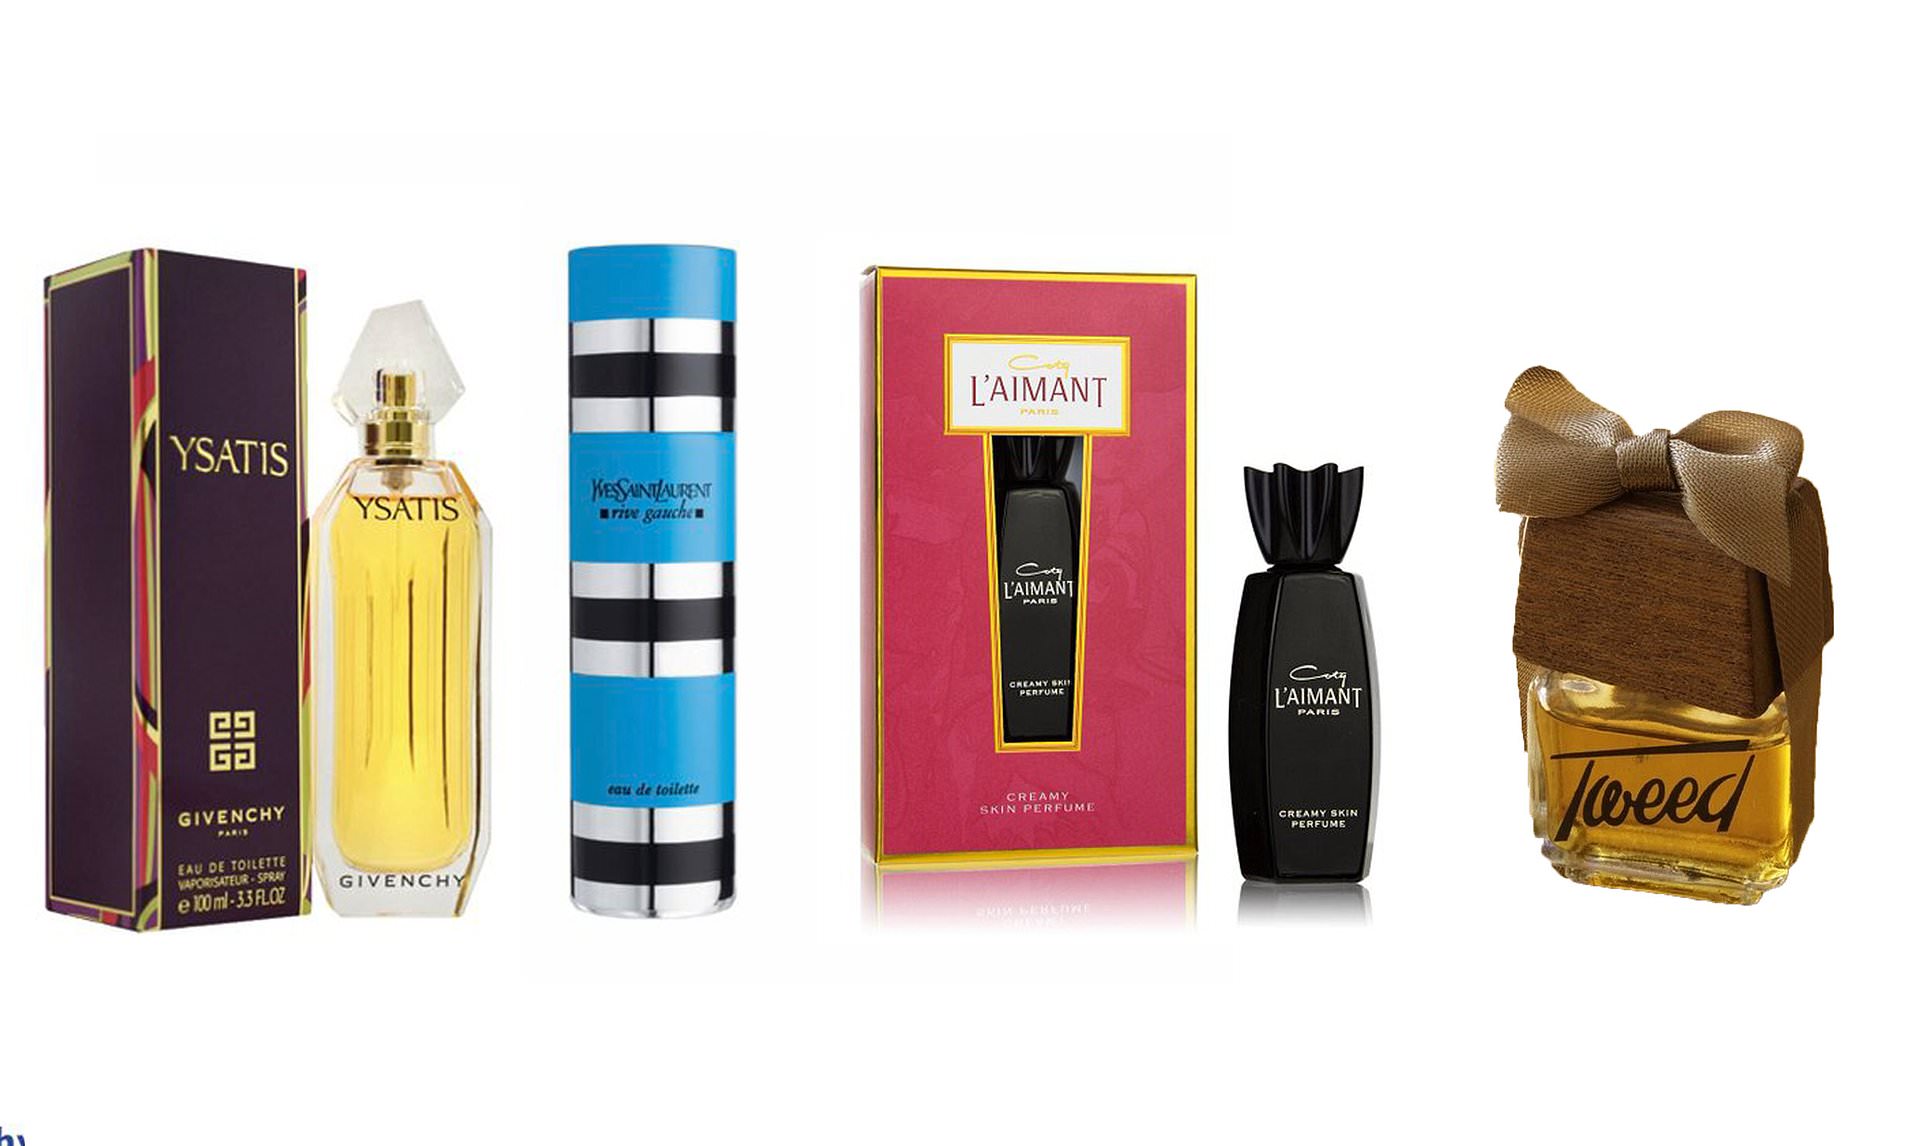 Perfume fans reveal retro scents that transport them back to their youth | Daily Mail Online